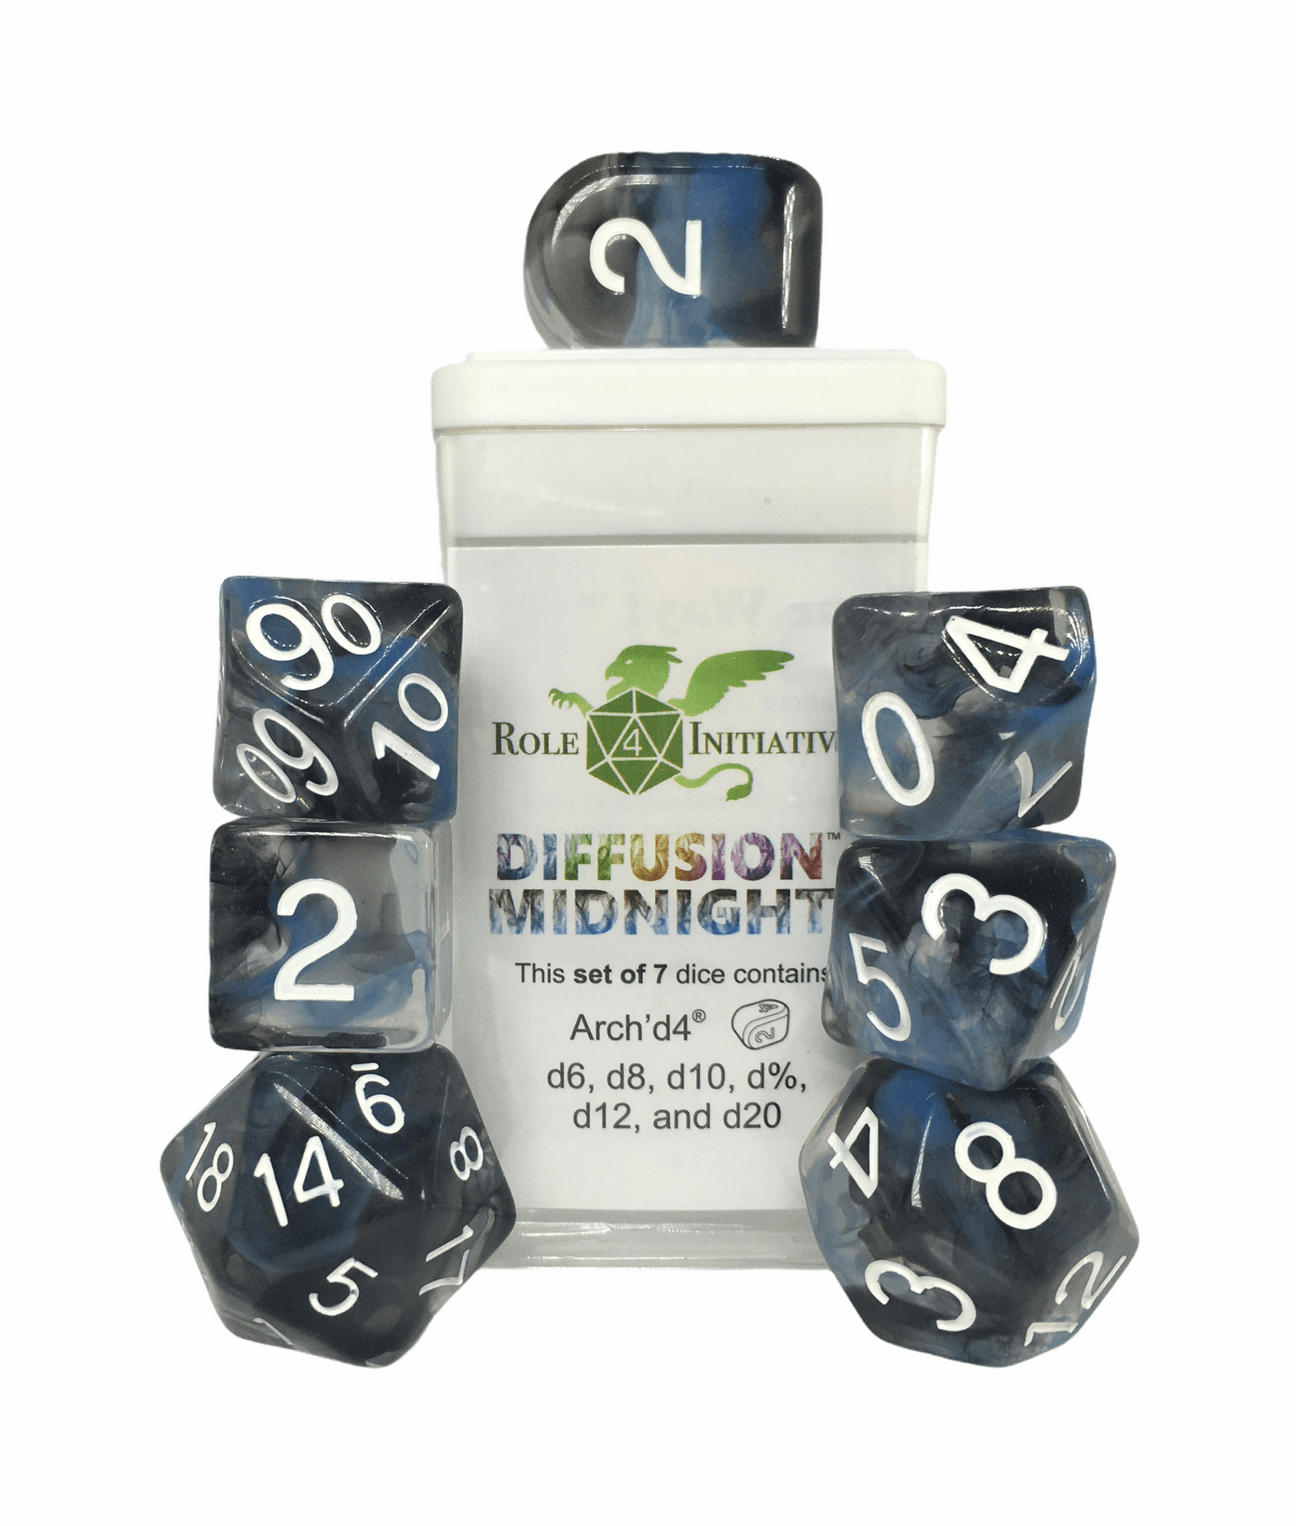 Midnight Diffusion Dice - 7 dice set (with Arch’d4™) - The Fourth Place